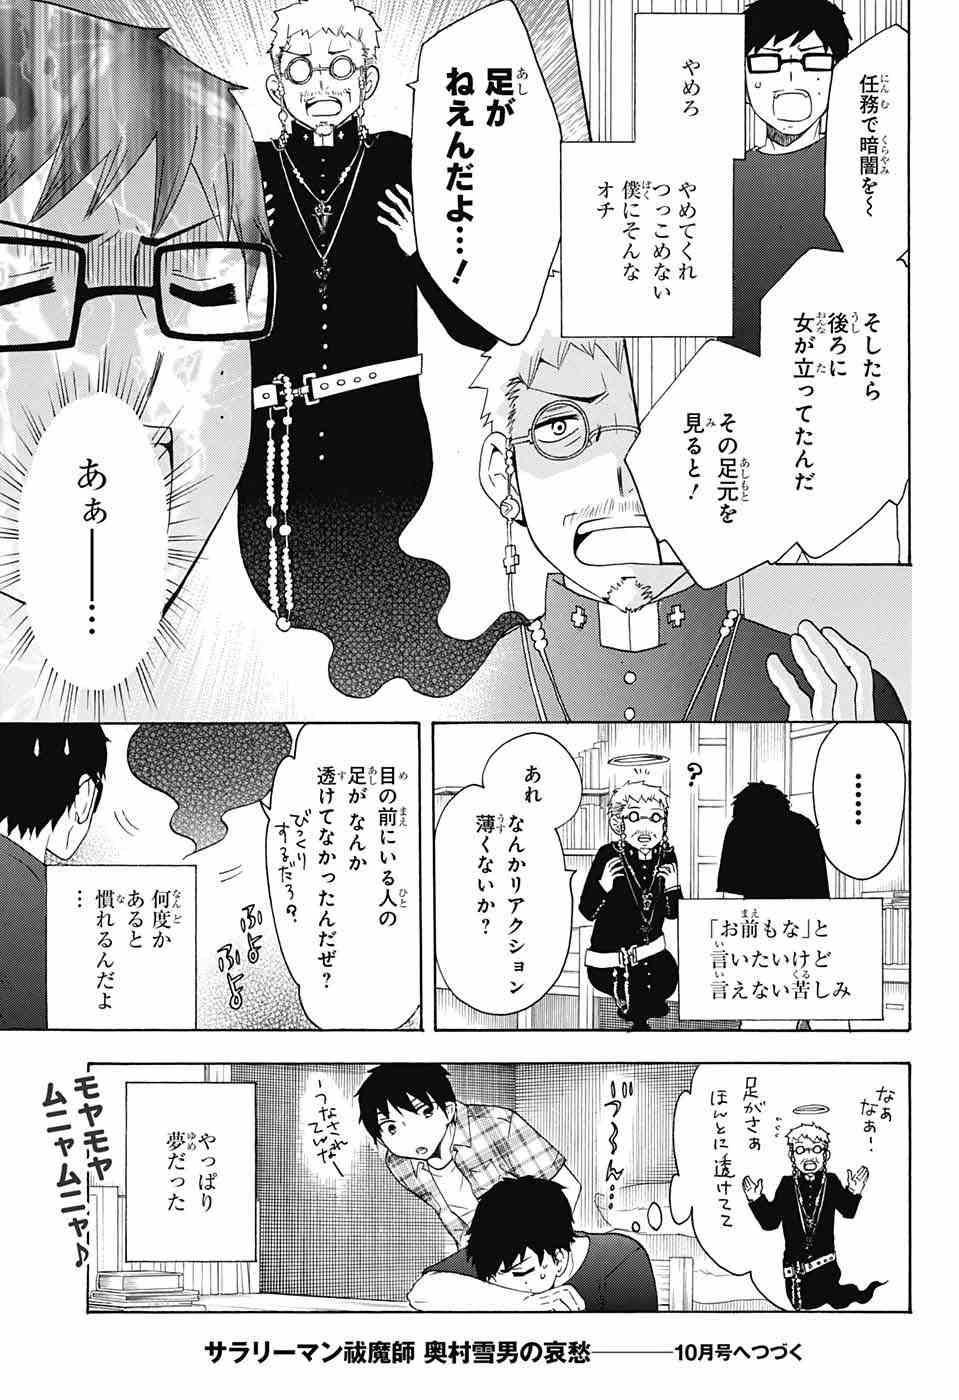 Ao no Exorcist - Chapter 81 - Page 40